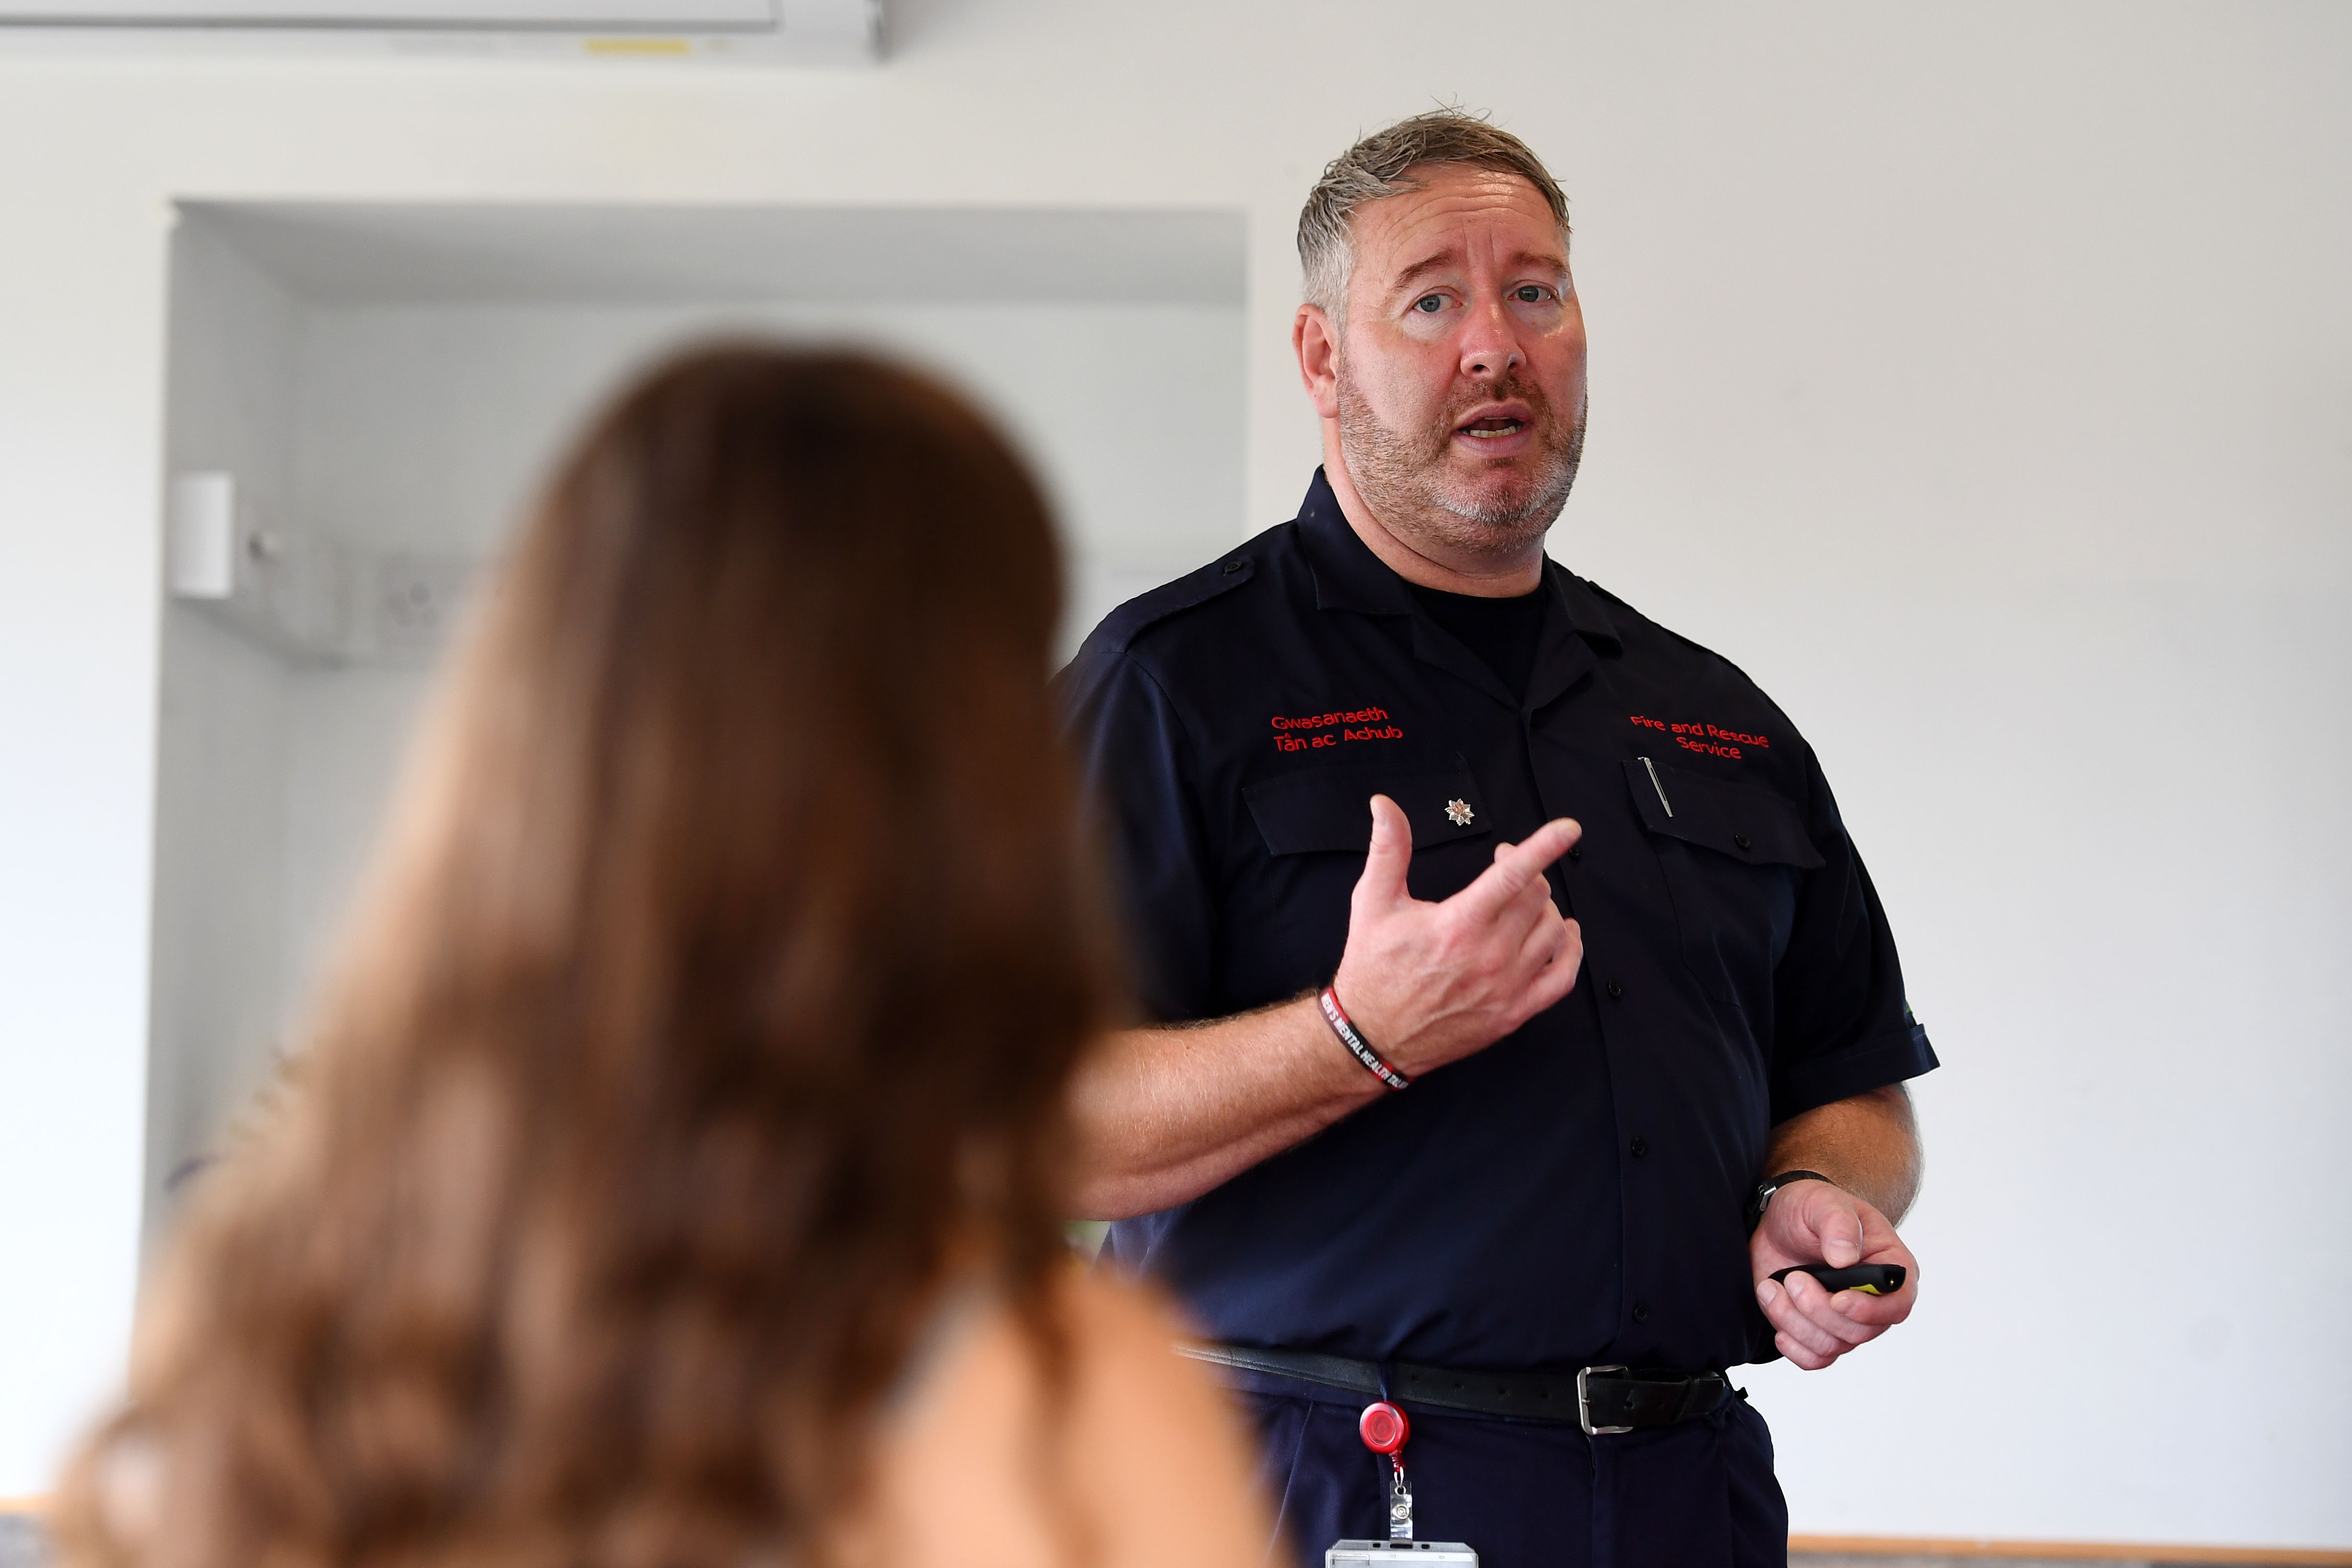 Fire and Rescue Officer presenting at 20mph educational course